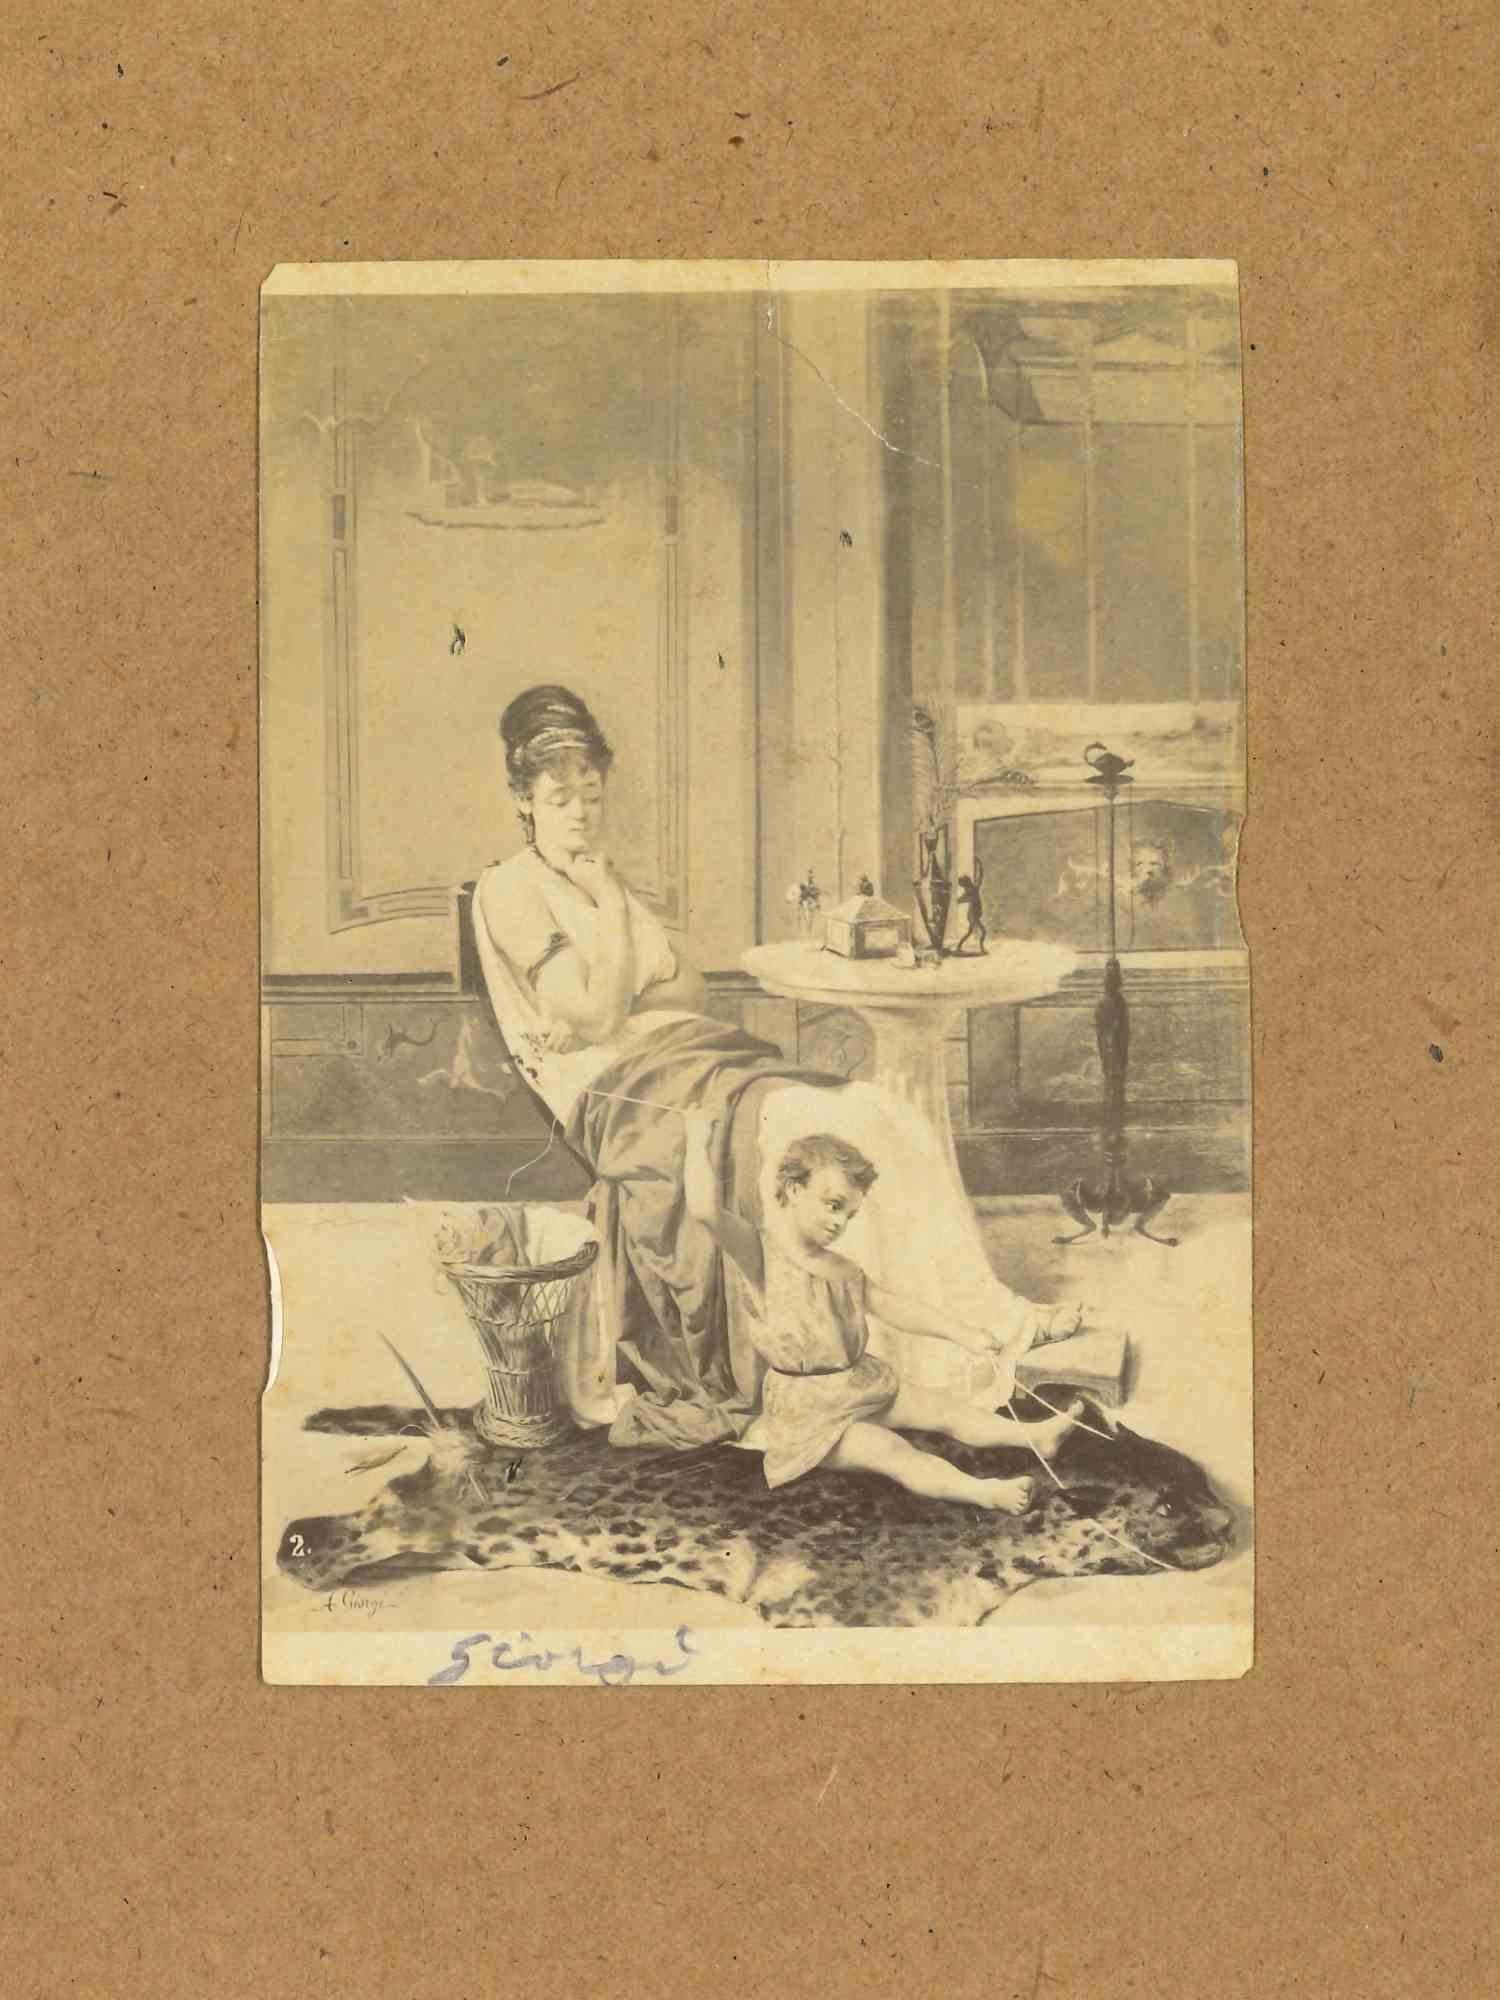 Unknown Figurative Photograph - Vintage Photo of Painting - Mother with Child - Early 20th Century